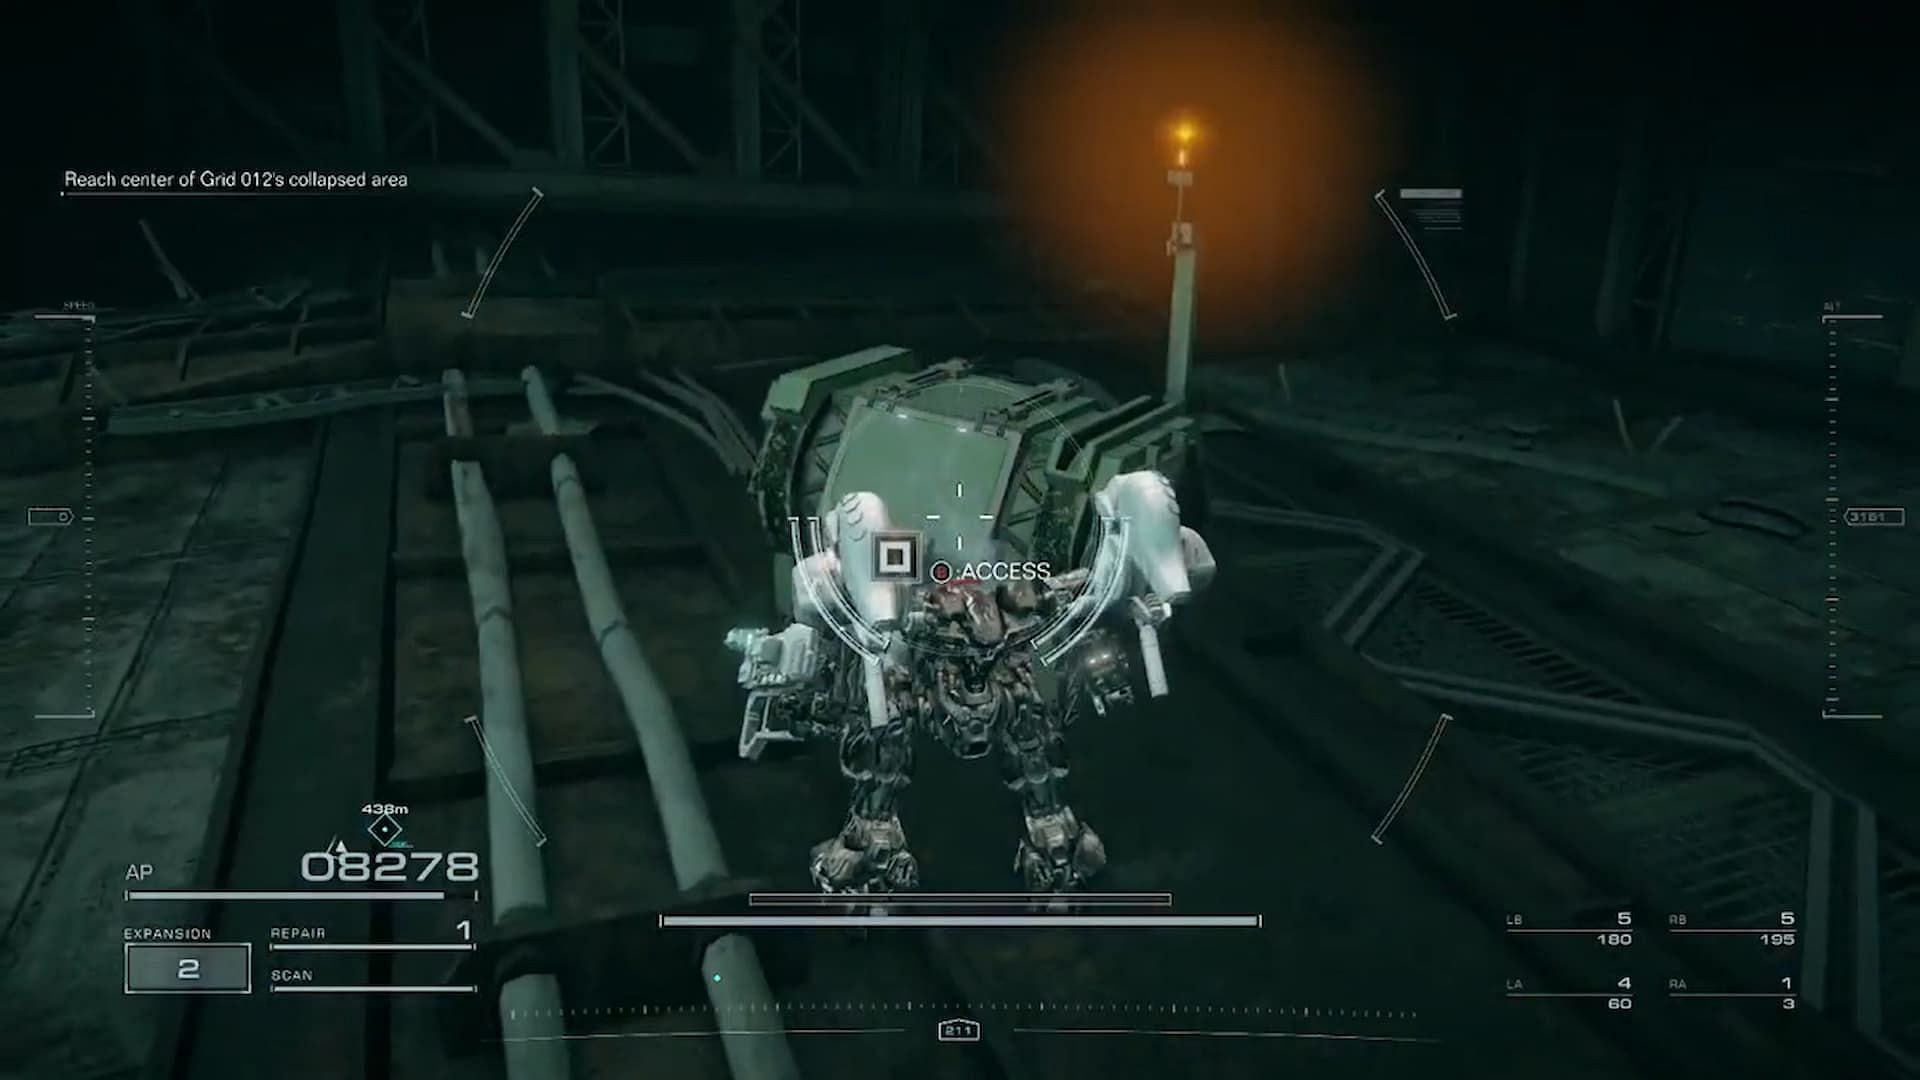 Bad Cook Flamethrower is one of the unique secret weapons in Armored Core 6 (Image via FromSoftware)